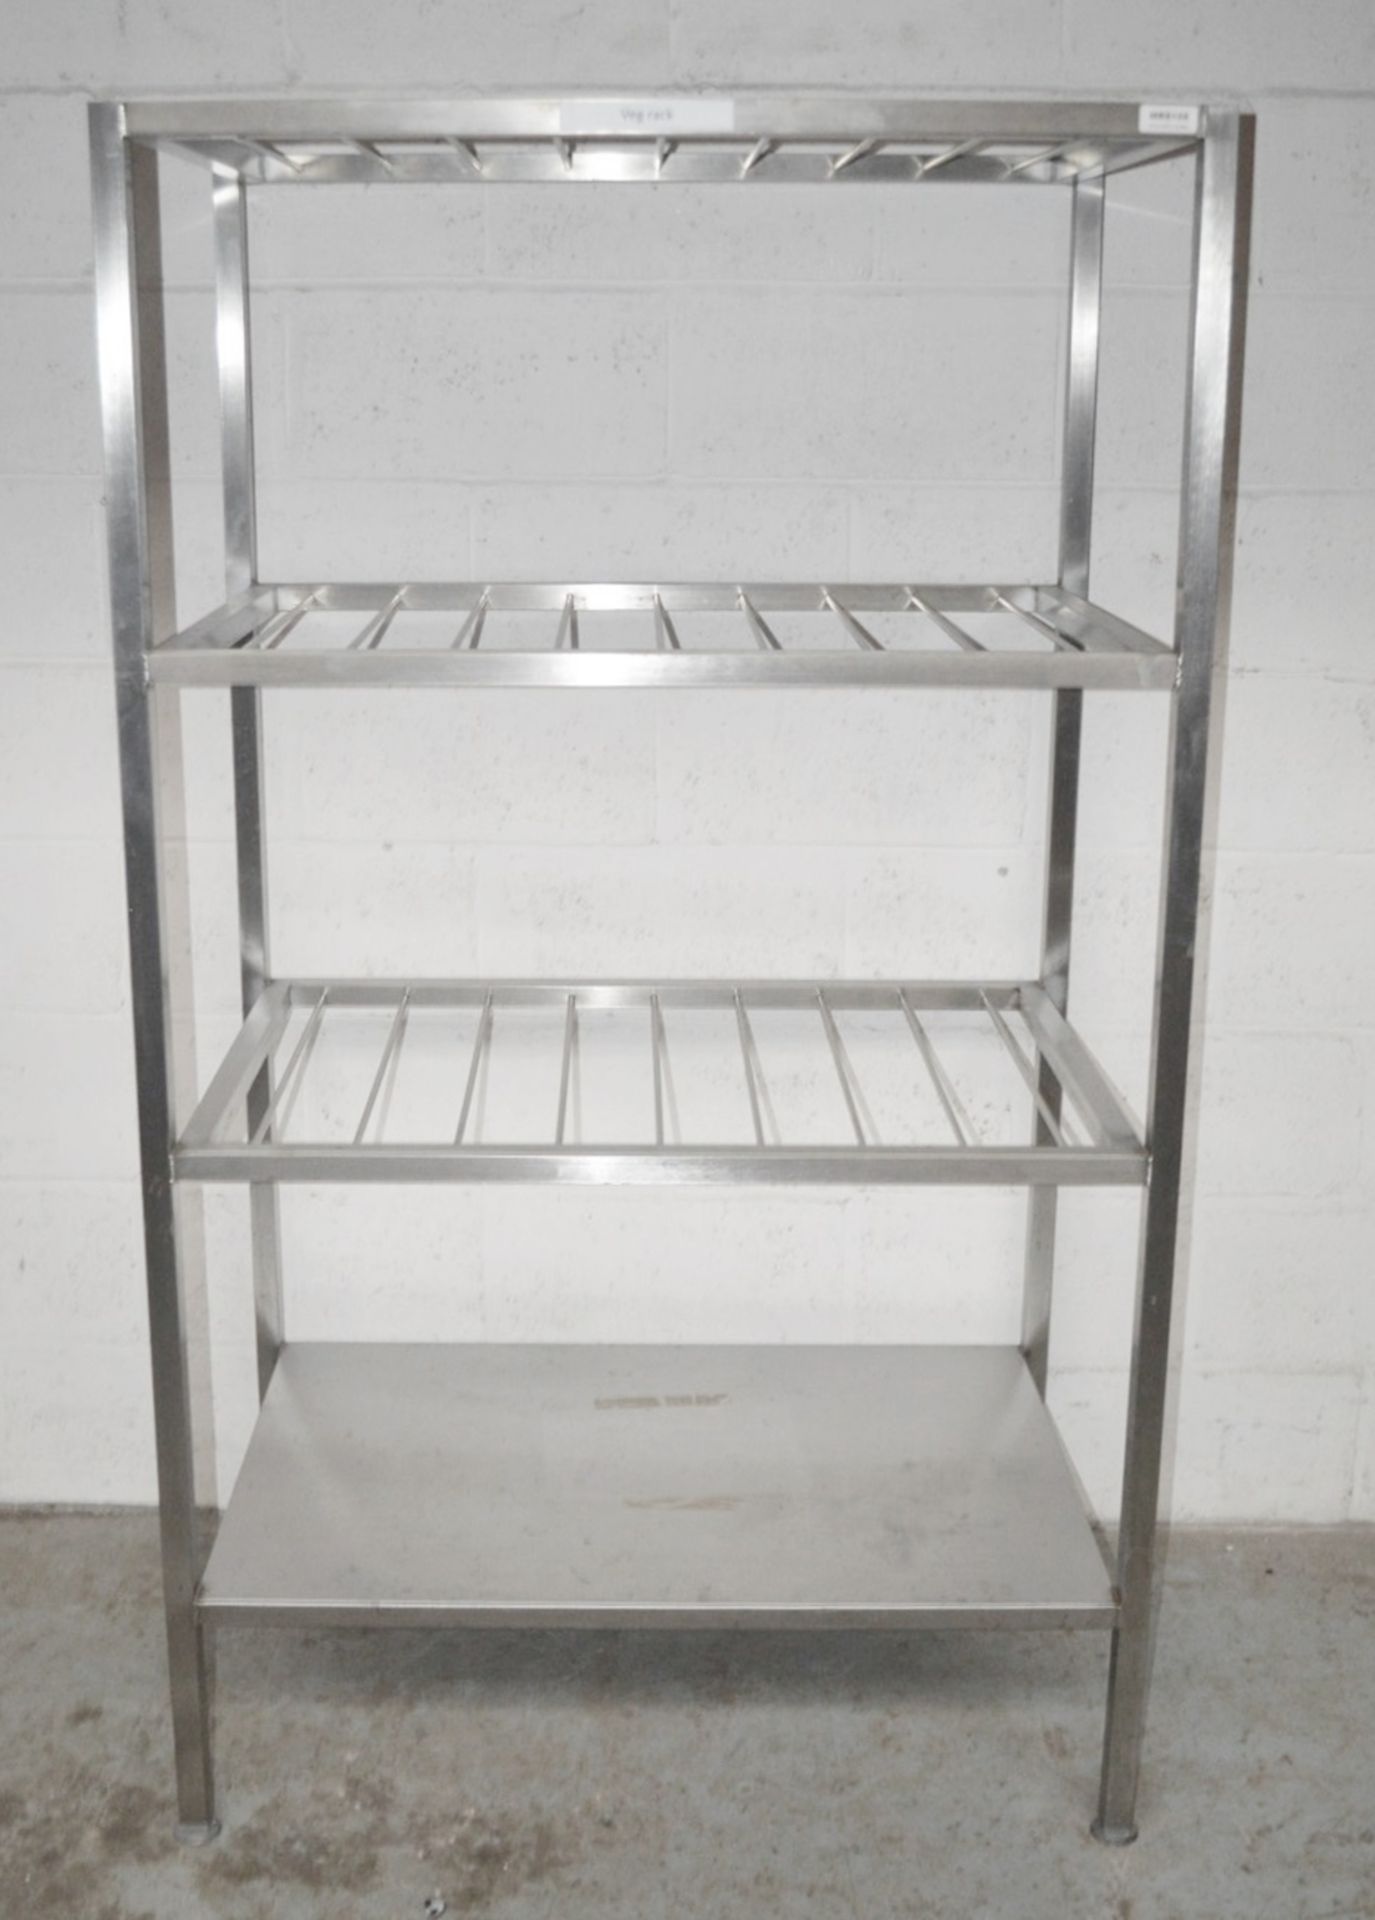 1 x Stainless Steel Commercial Kitchen Veg Rack - Dimensions: H174 x W100 x D60cm - Very Recently - Image 3 of 3